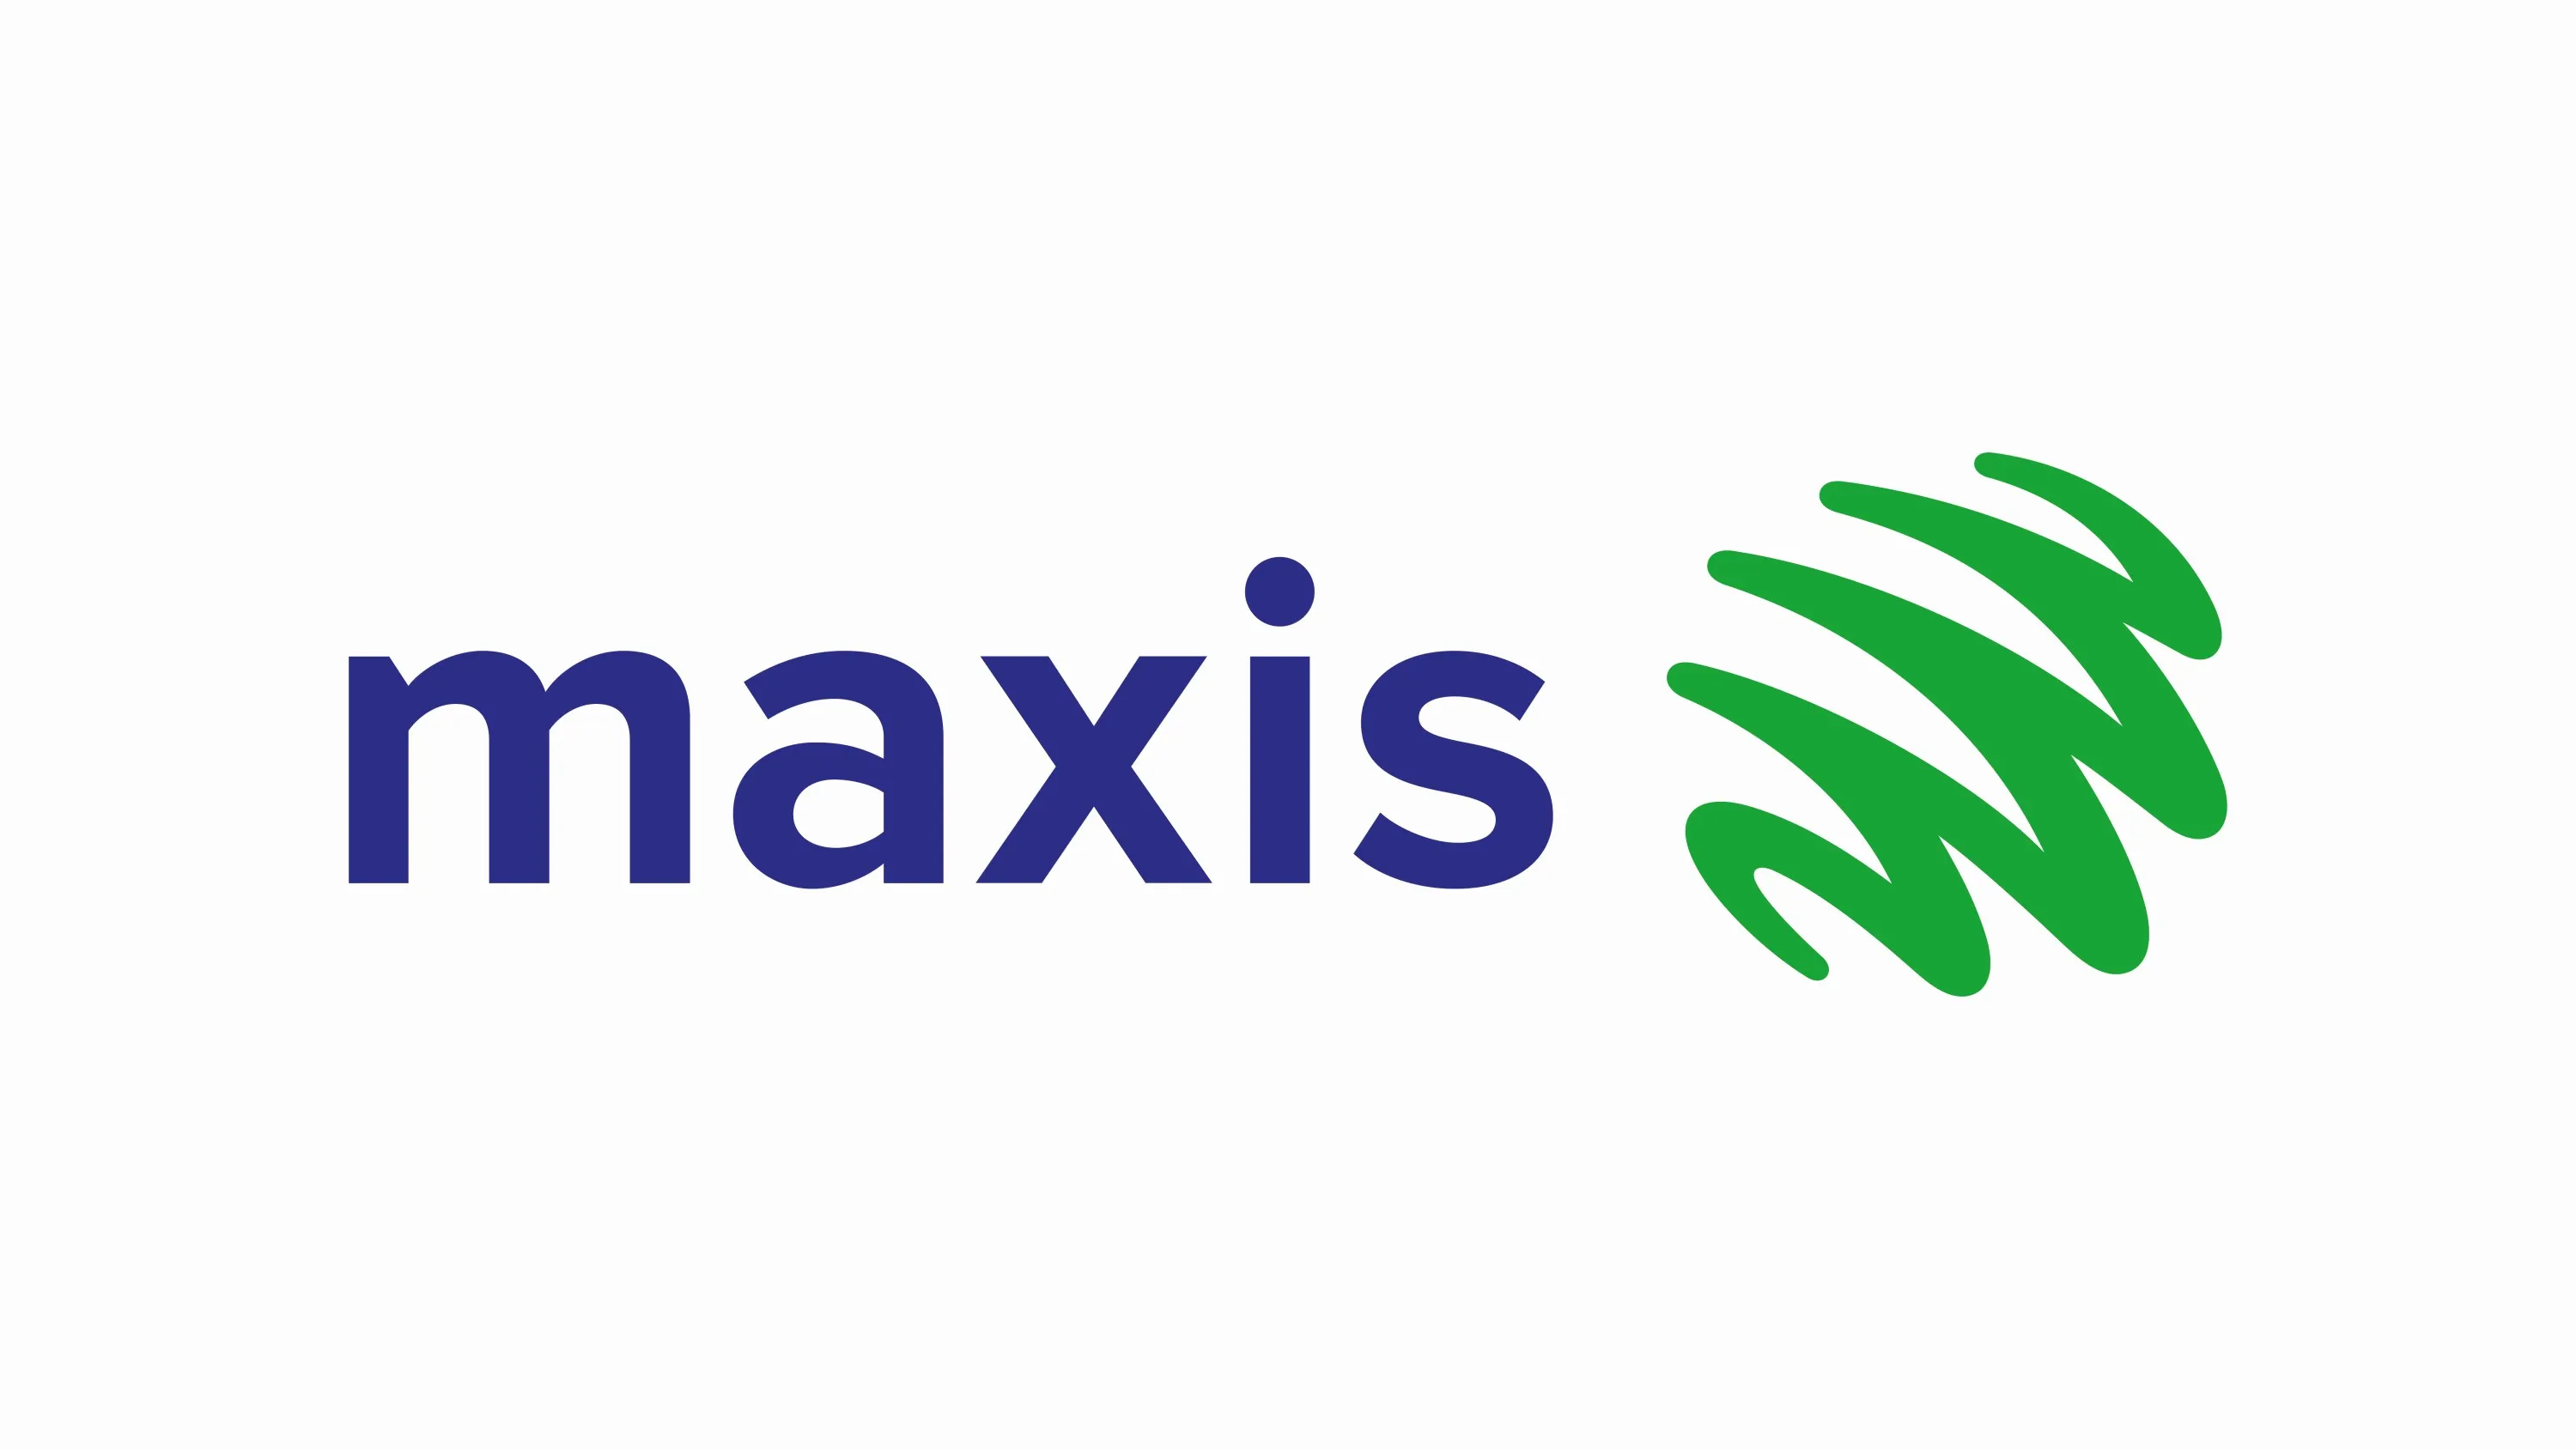 Maxis continues strong momentum for the year with healthy Q2 performance